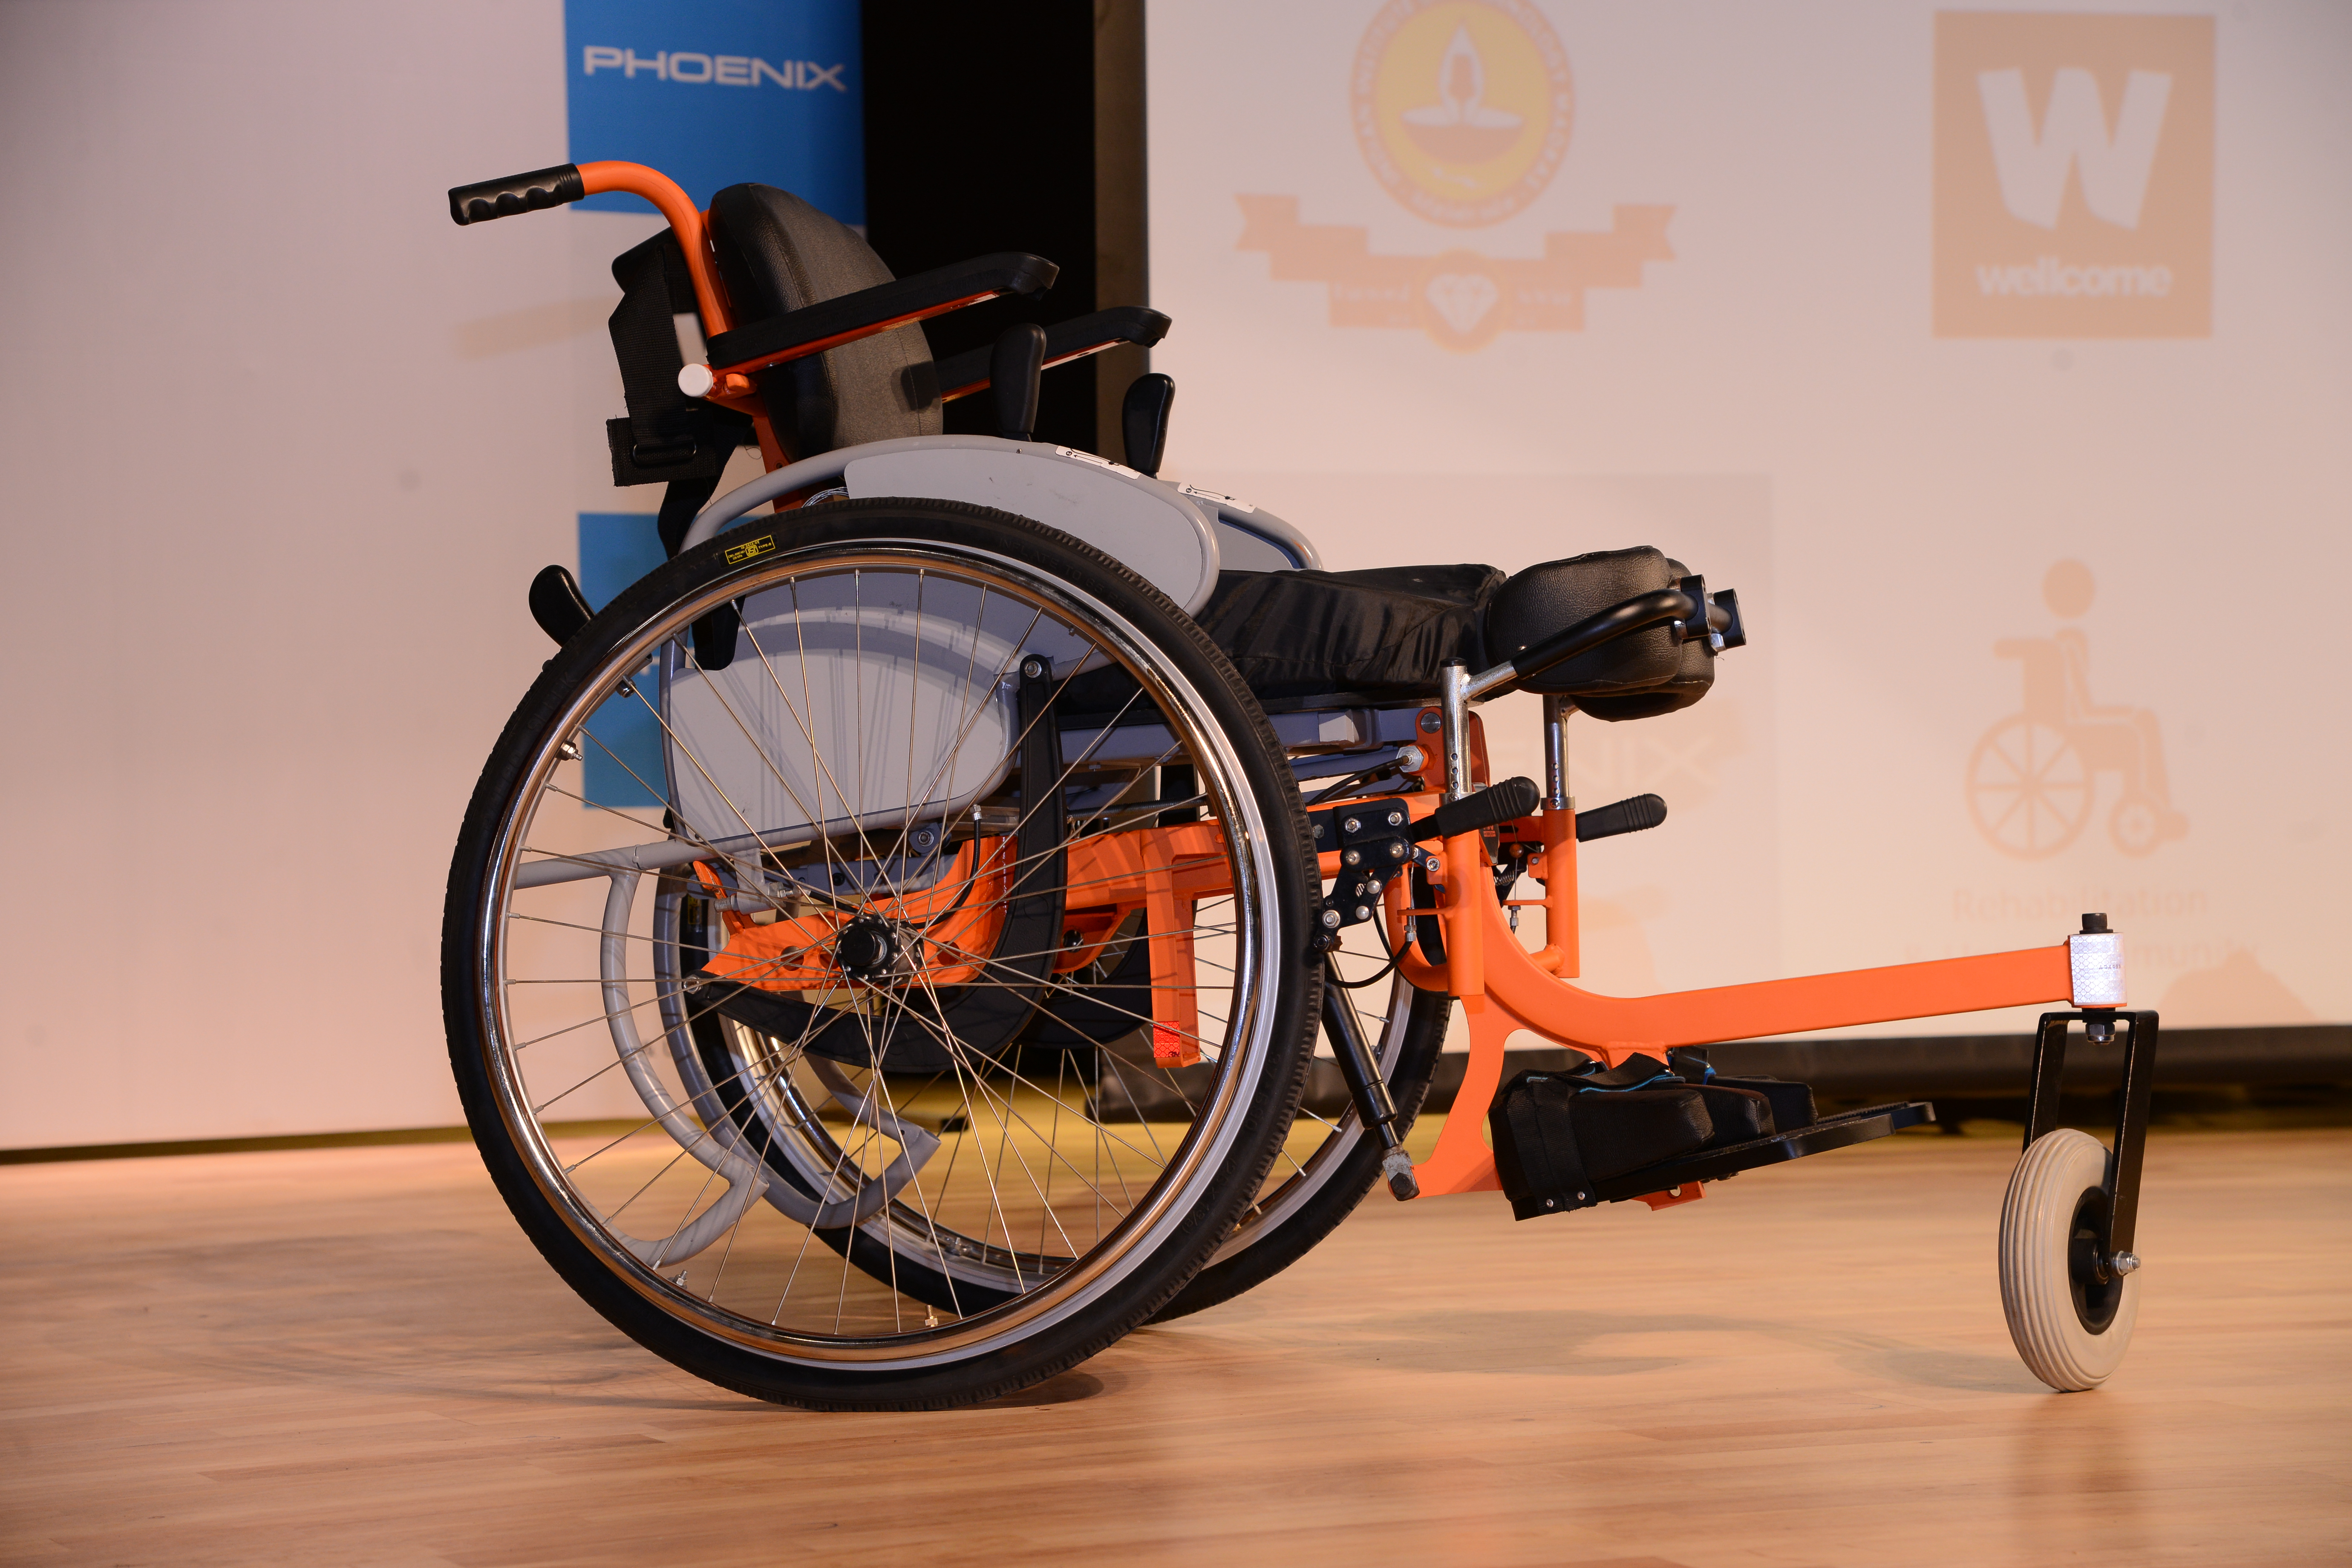 ‘Arise,’ the Standing Wheelchair designed and developed by TTK Center for Rehabilitation Research and Device Development (R2D2) at IIT Madras. (Source: IIT-Madras)